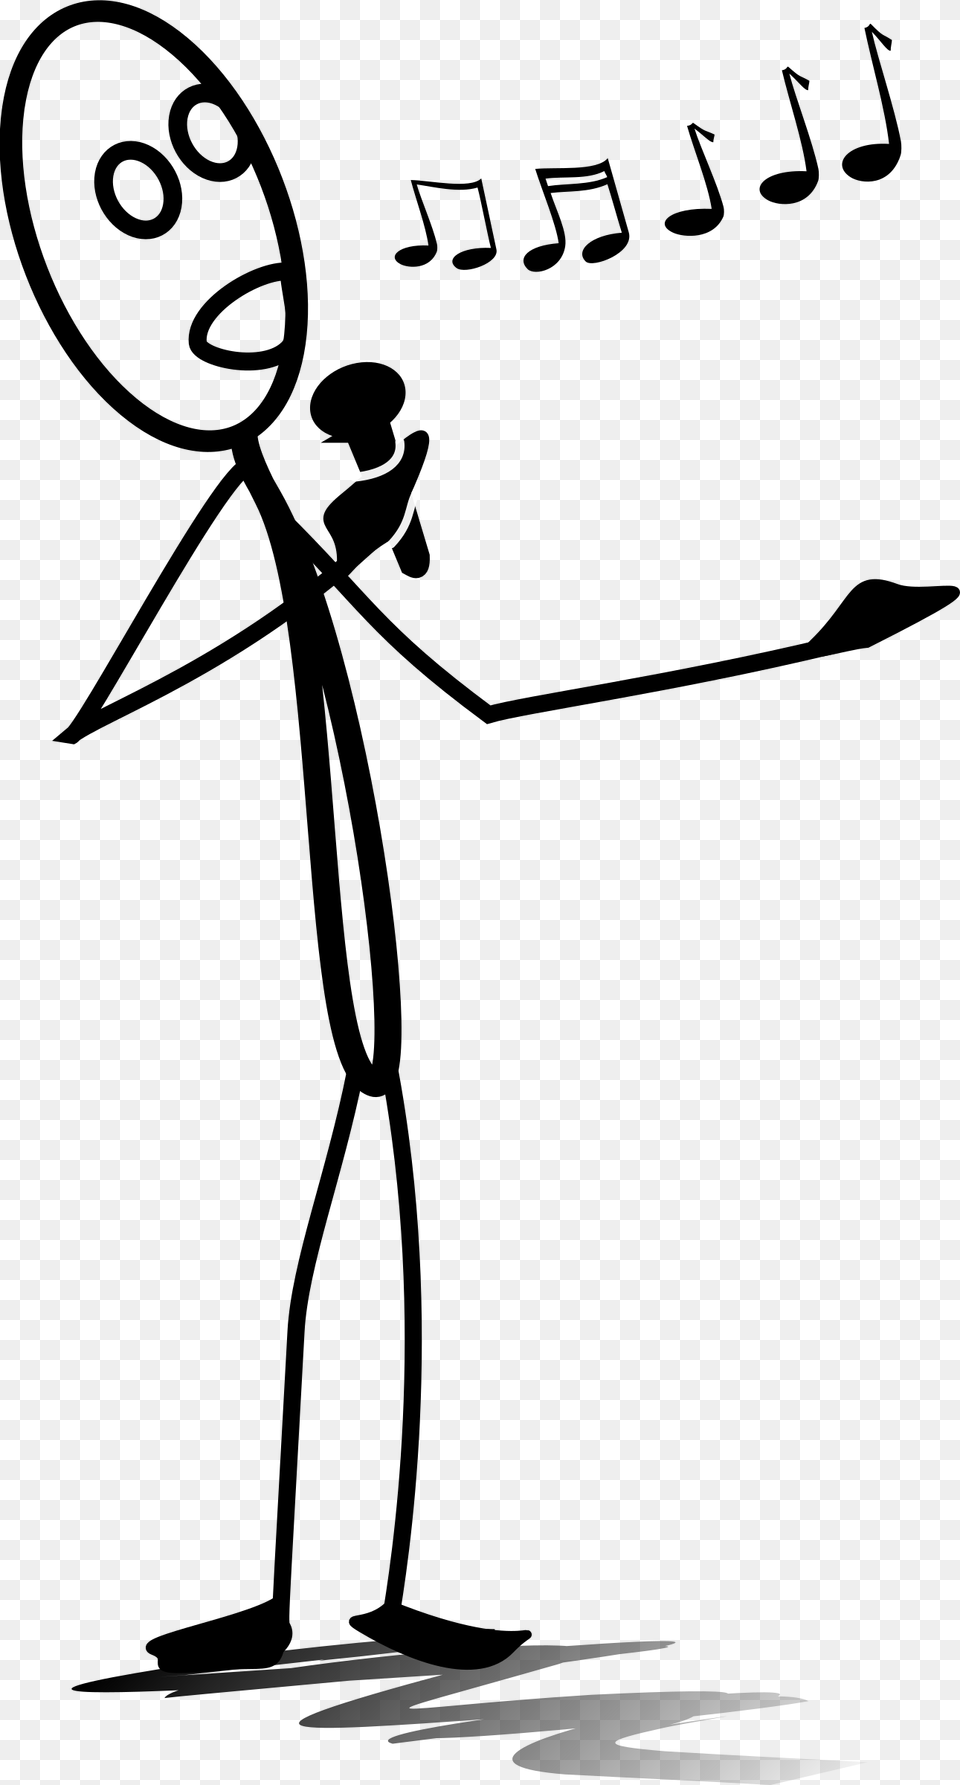 Transparent Stick Figure Stick Figure Singing, Cutlery, Silhouette, Fork, Gray Png